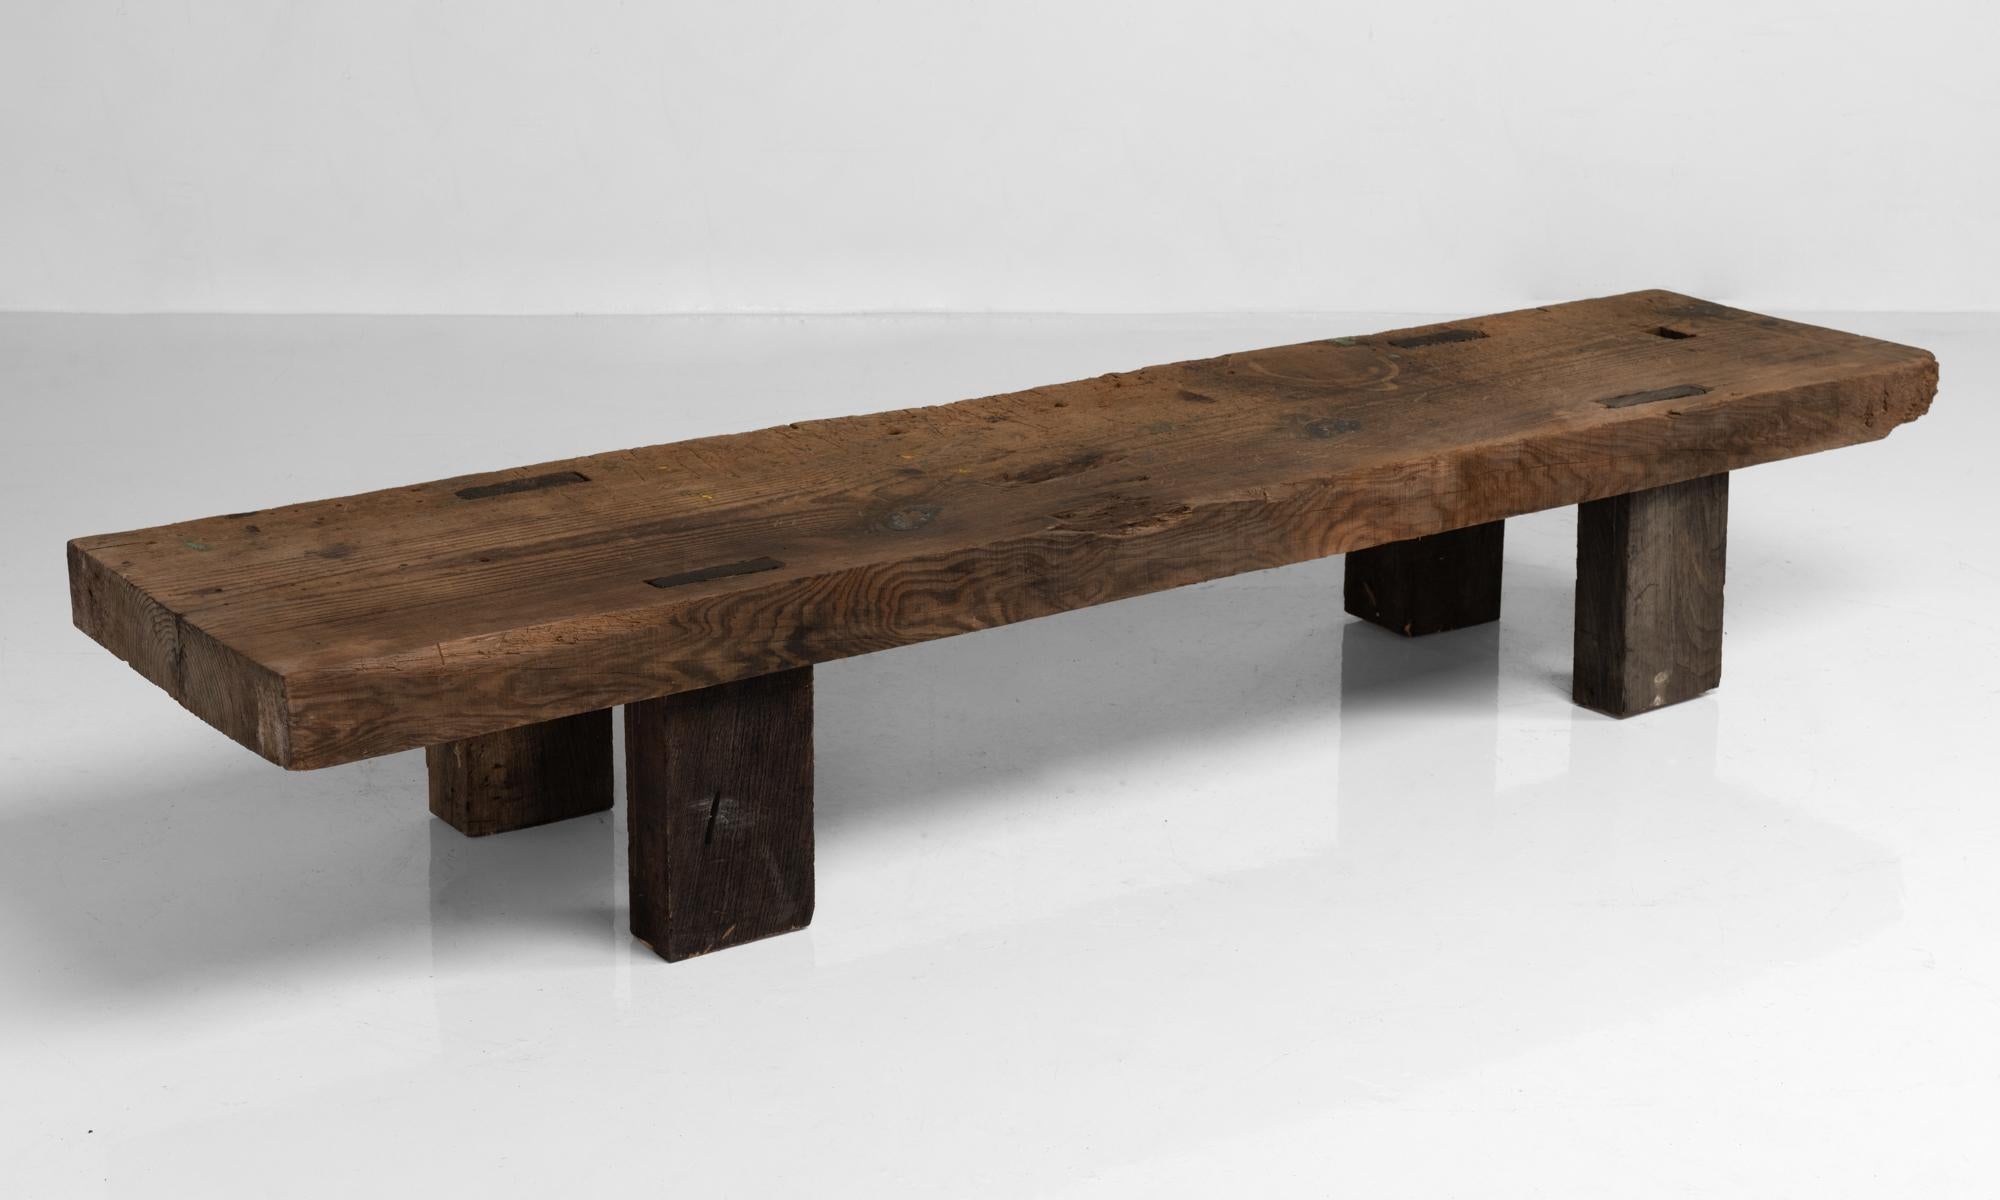 Primitive pine coffee table, France, circa 1900

Thick pine slab top on oak feet with rustic construction.